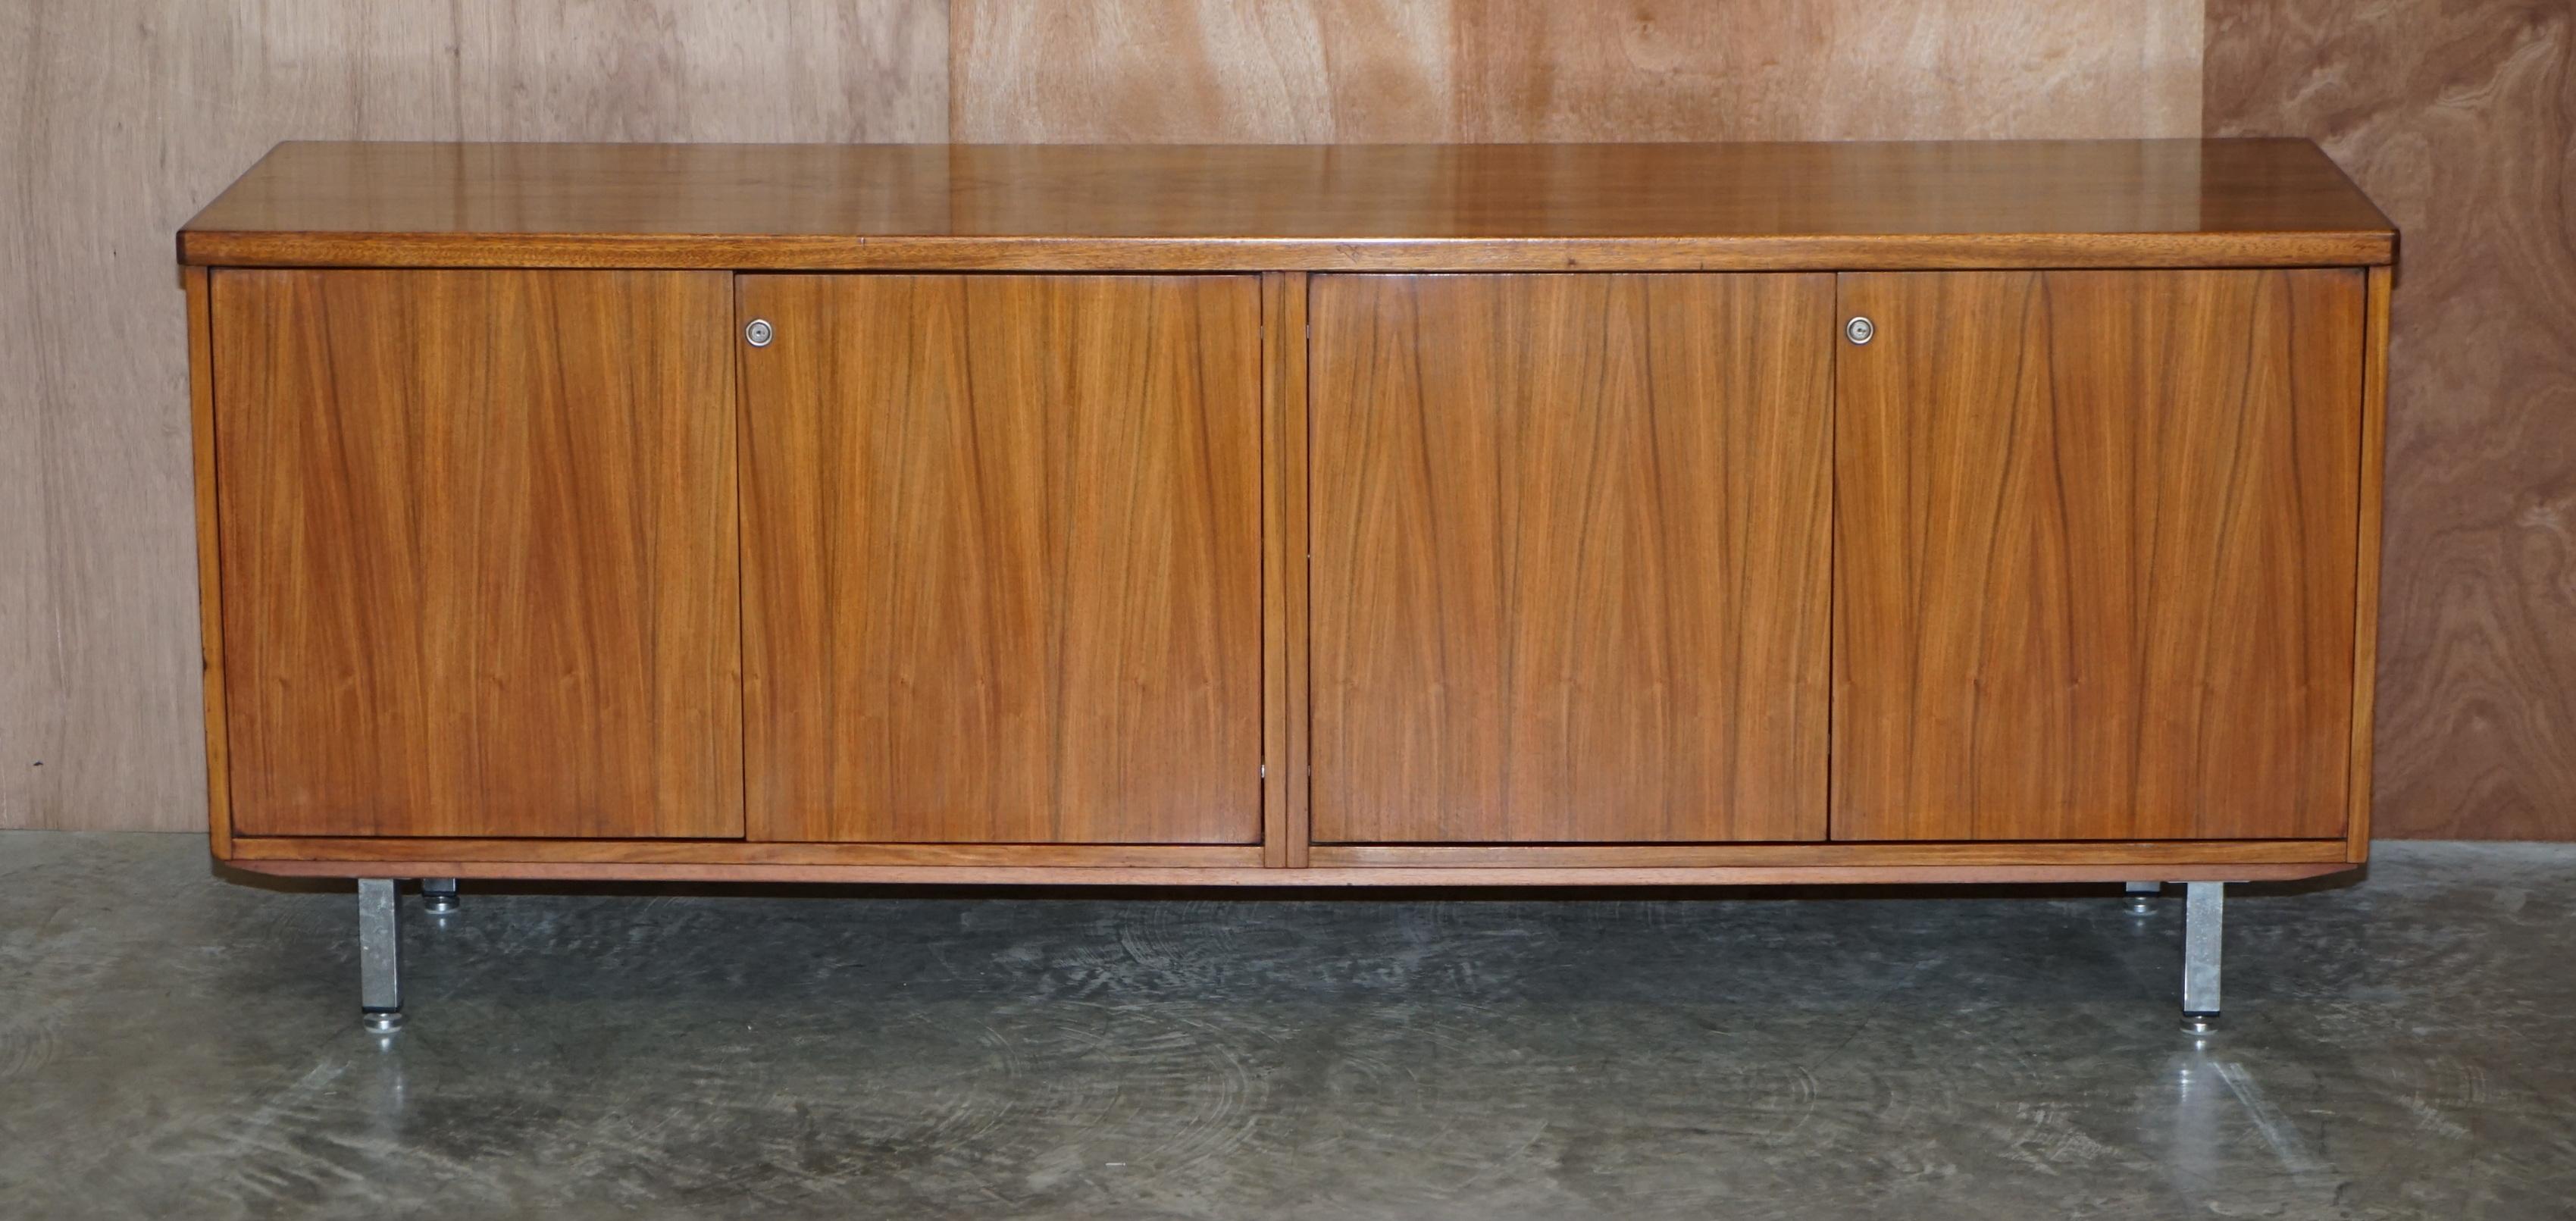 We are delighted to offer this stunning fully restored vintage Mid Century Modern hardwood sideboard

A very good looking well made and decorative piece with a glorious timber patina. The piece has been restored by my French Polisher, he has